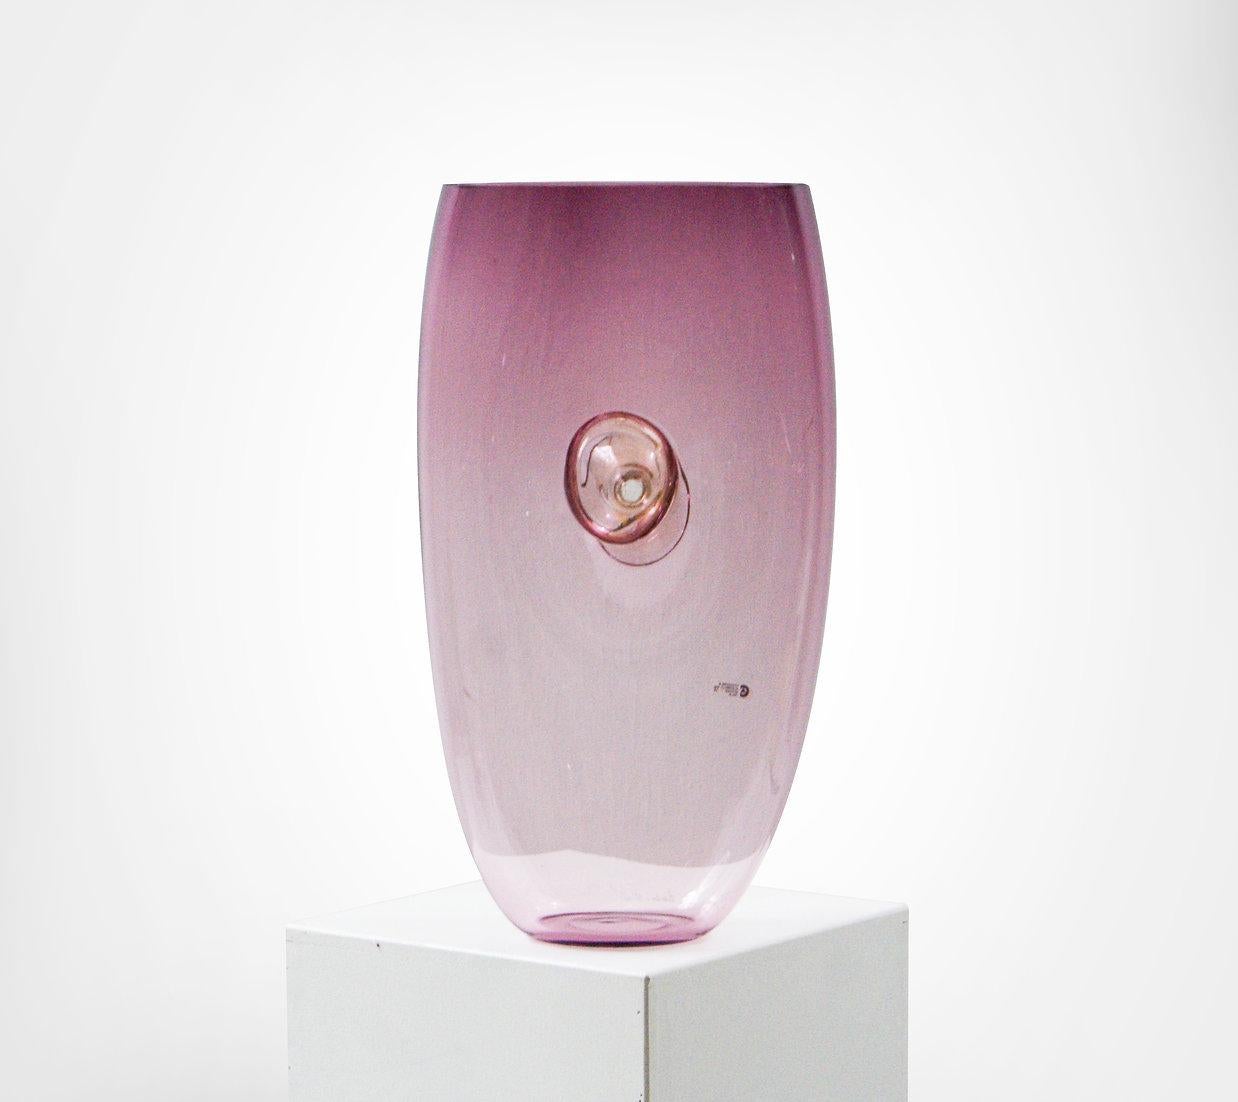 Unique large Murano glass vases.
Designed by Gino Cenedese and Maurizio Albarelli for Cenedese et Albarelli, circa late 1970s.
Deep gradient amethyst colouring, fading to a pinkish clear glass at the base.
The midsection features a Cordonato